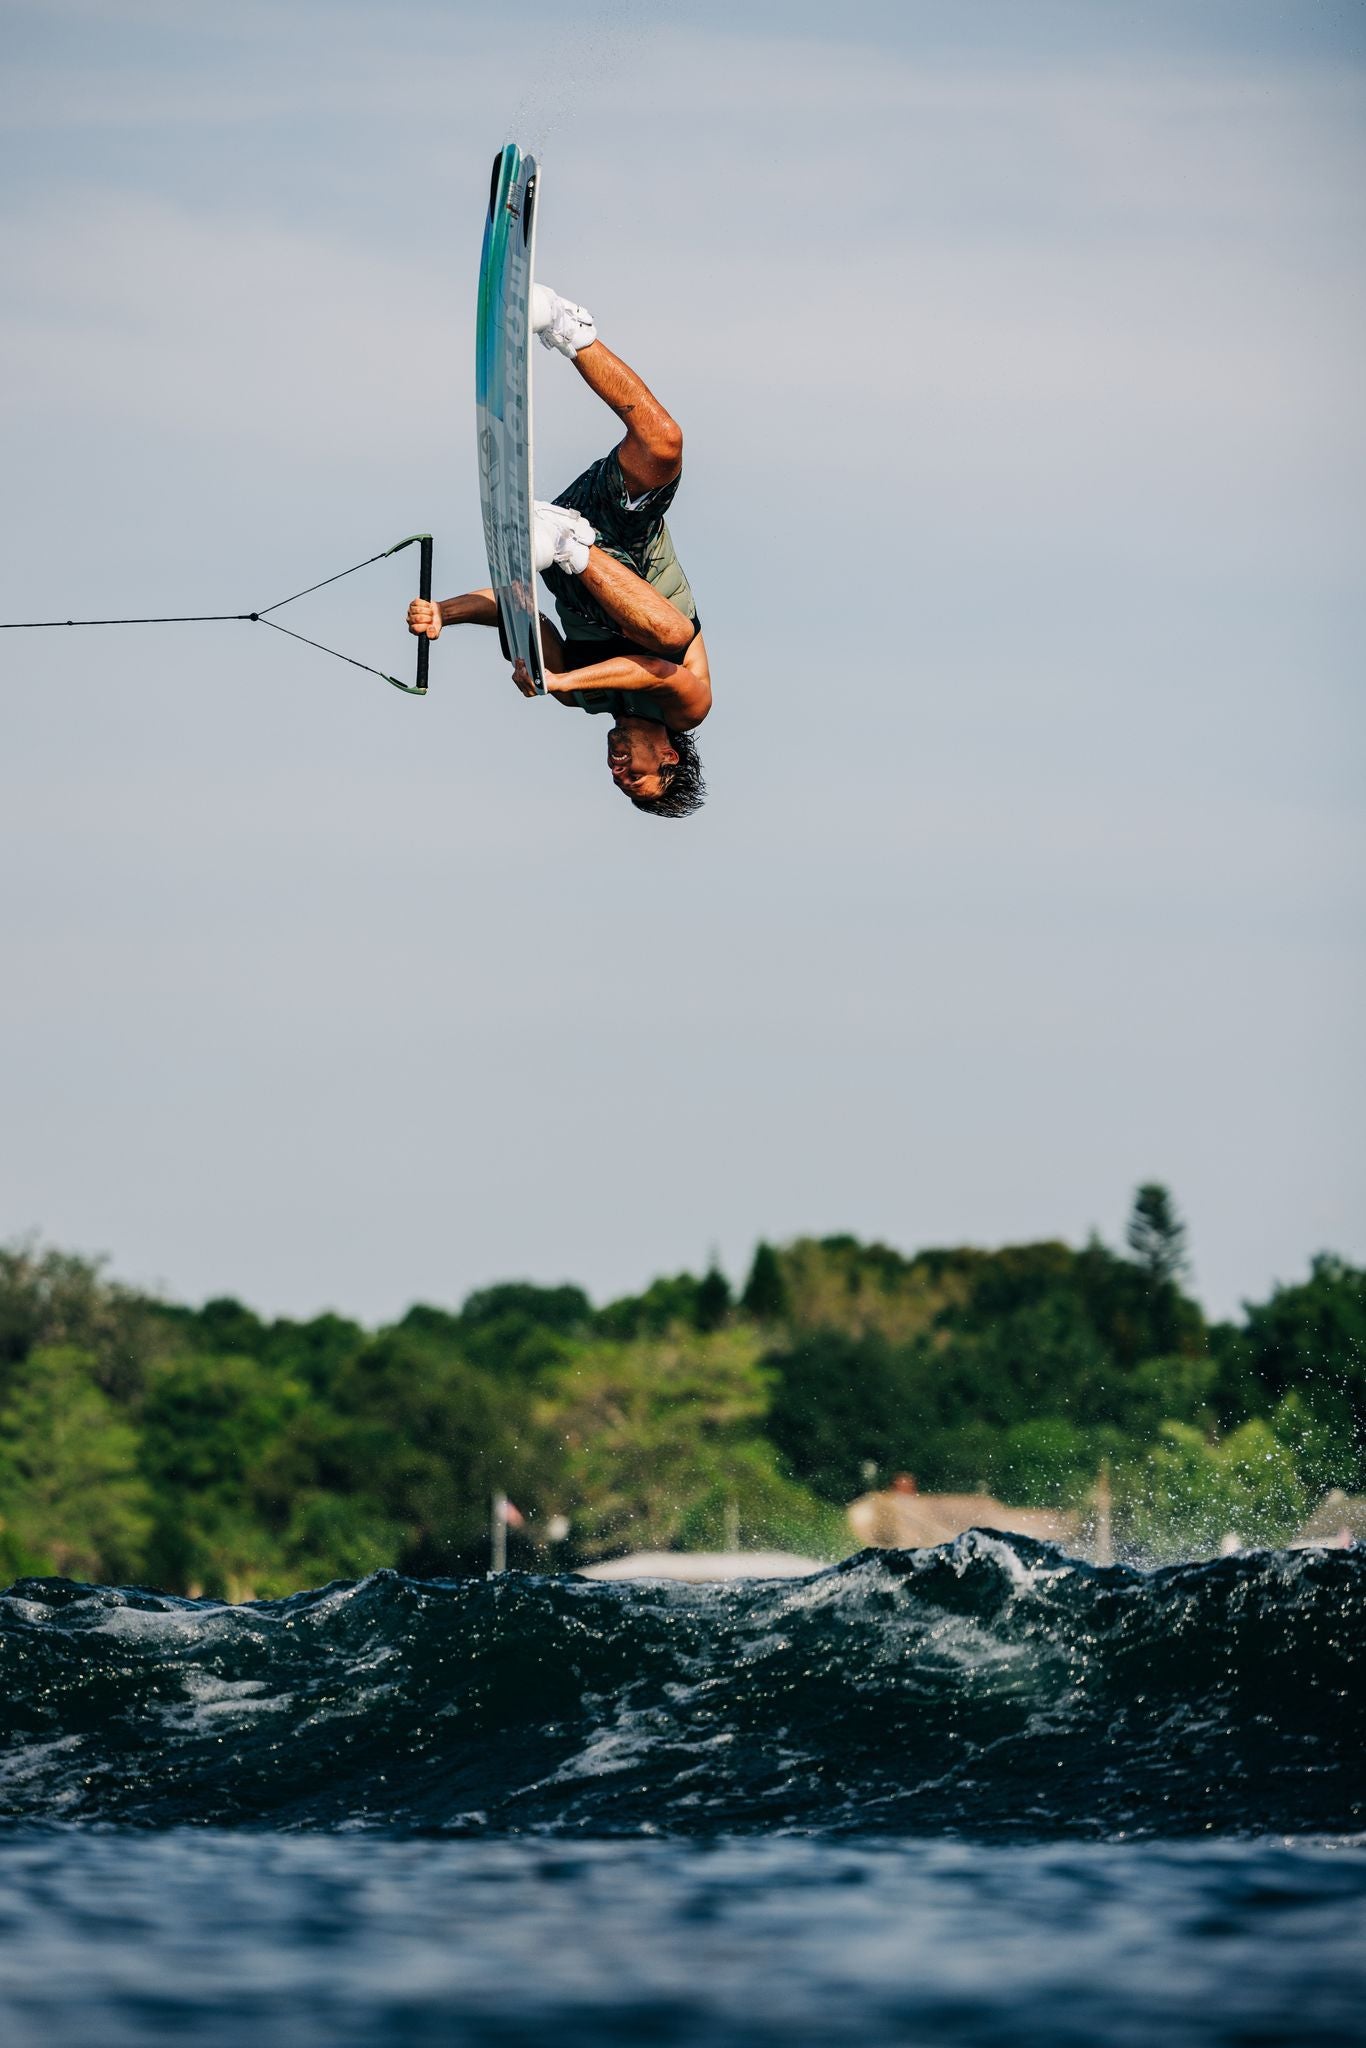 Harley Clifford, a lightweight wakeboarder, showcasing his skills and performing tricks in the water while using the Liquid Force 2023 Remedy Aero Wakeboard board.